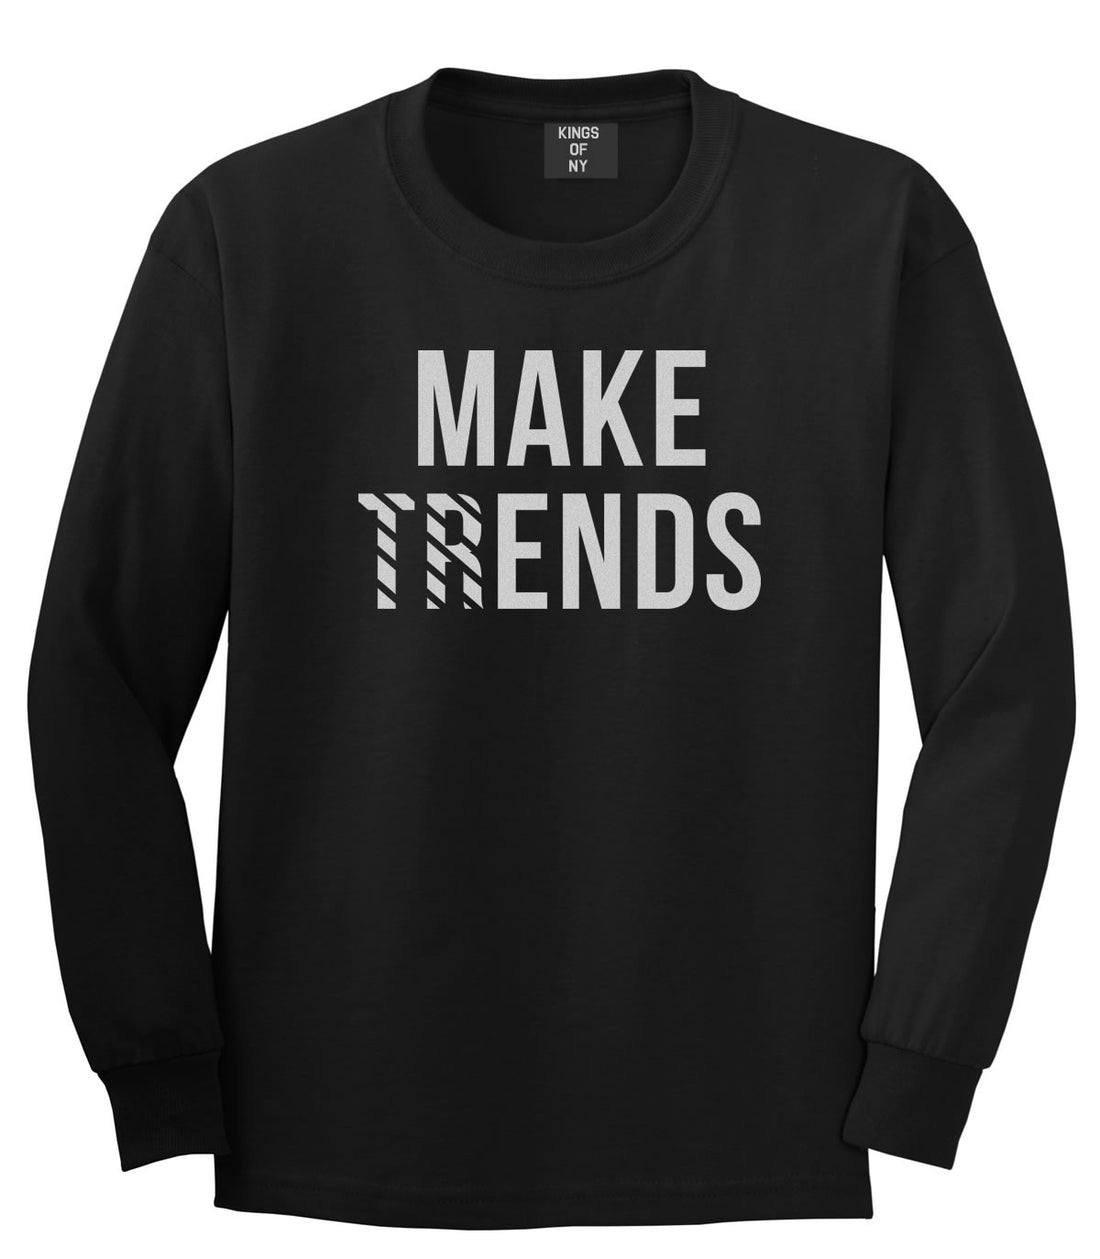 Make Trends Make Ends Boys Kids Long Sleeve T-Shirt in Black by Kings Of NY